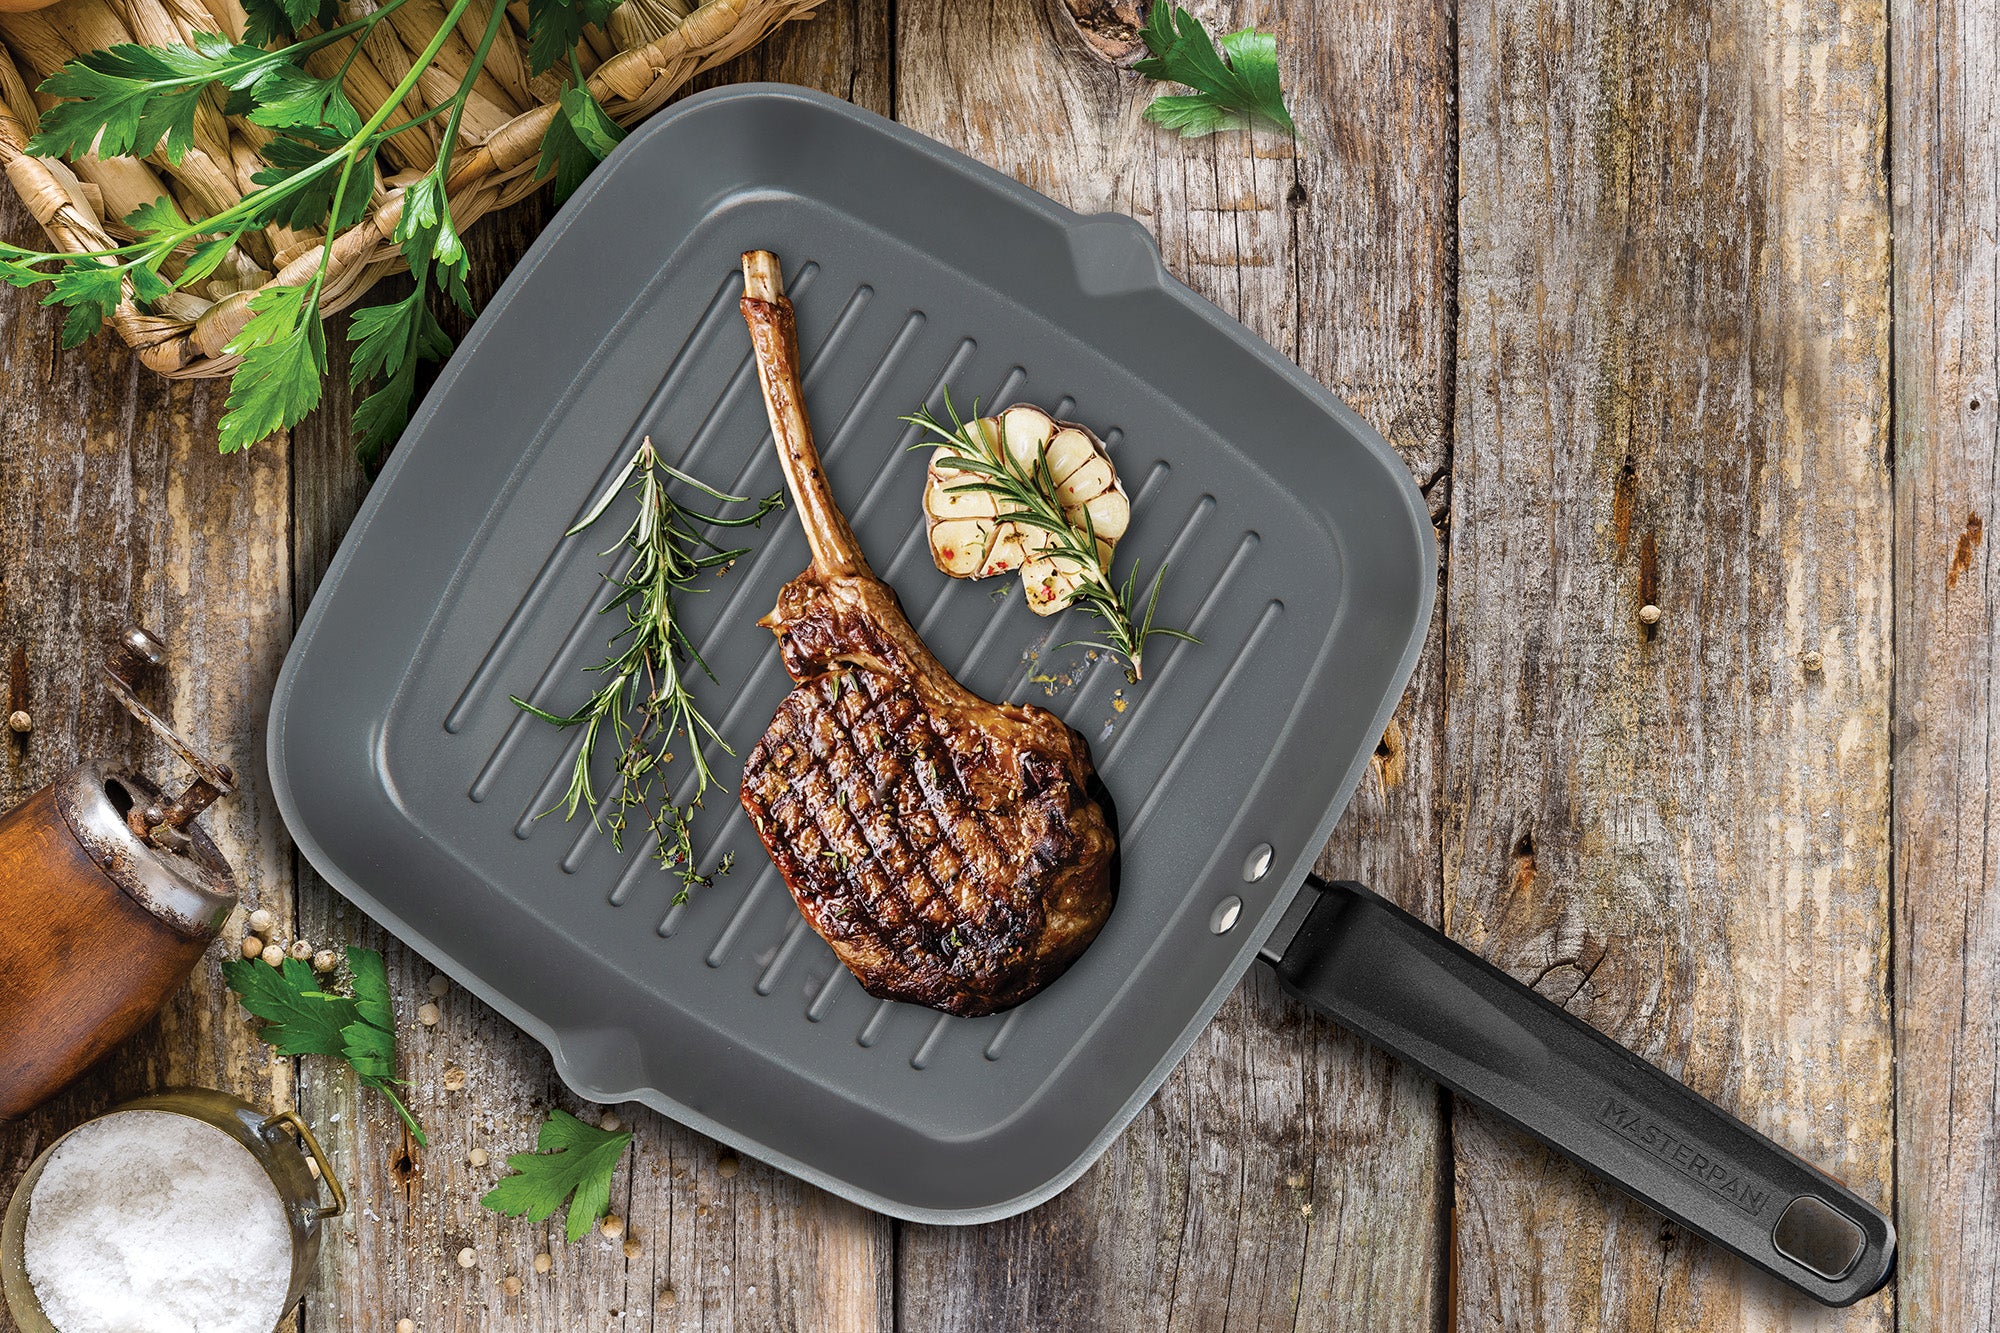 MasterPan Non-Stick Grill Pan with Folding Wooden Handle, 8, Black and  Brown